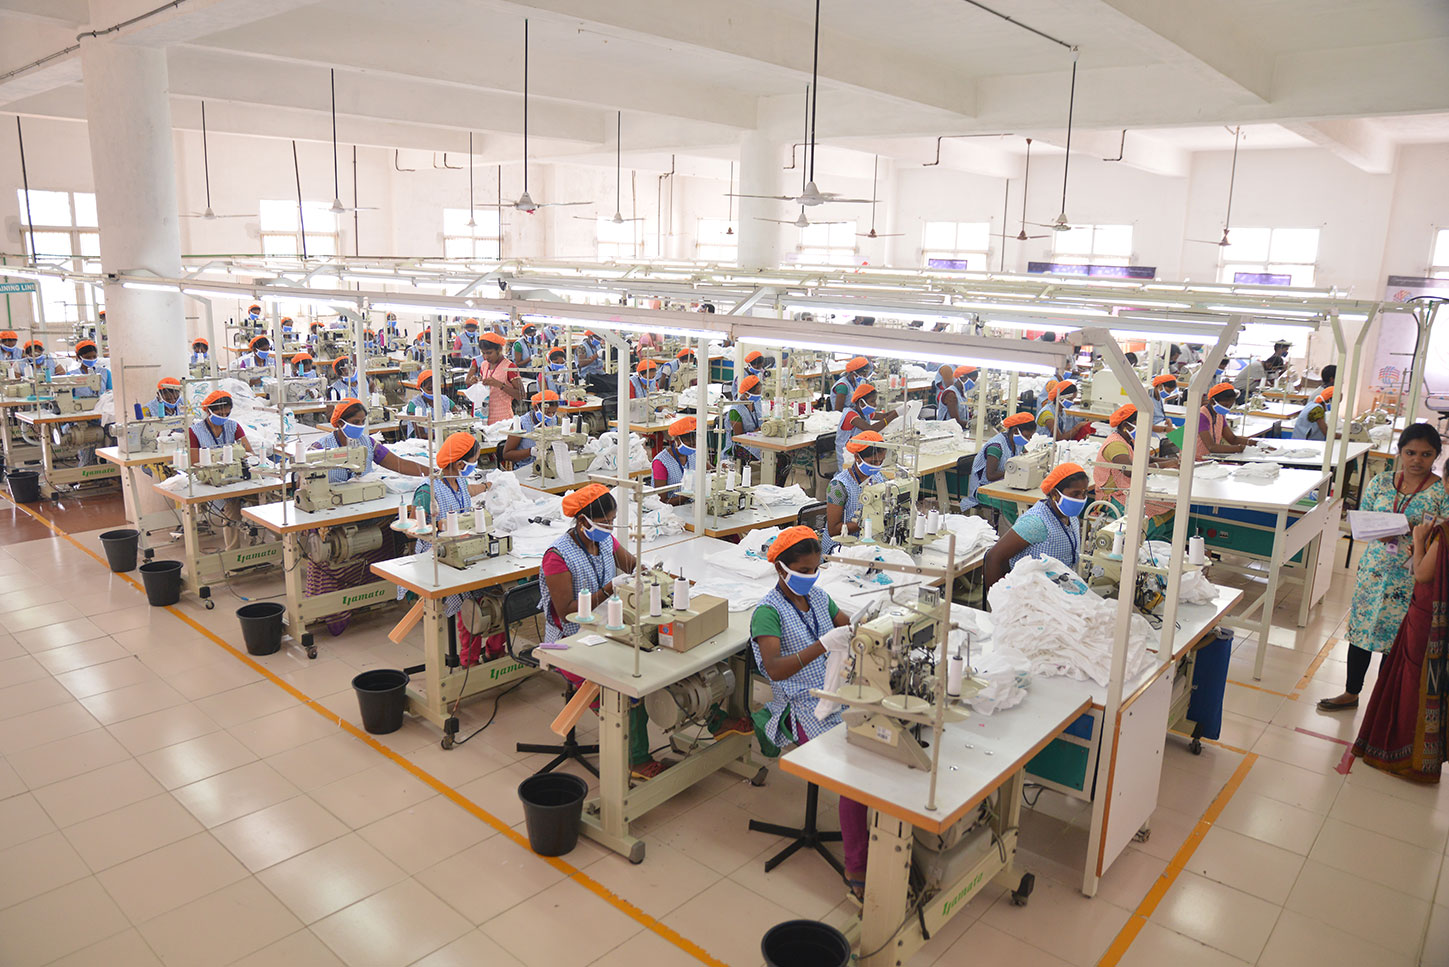 Made-to-order garment manufacturing